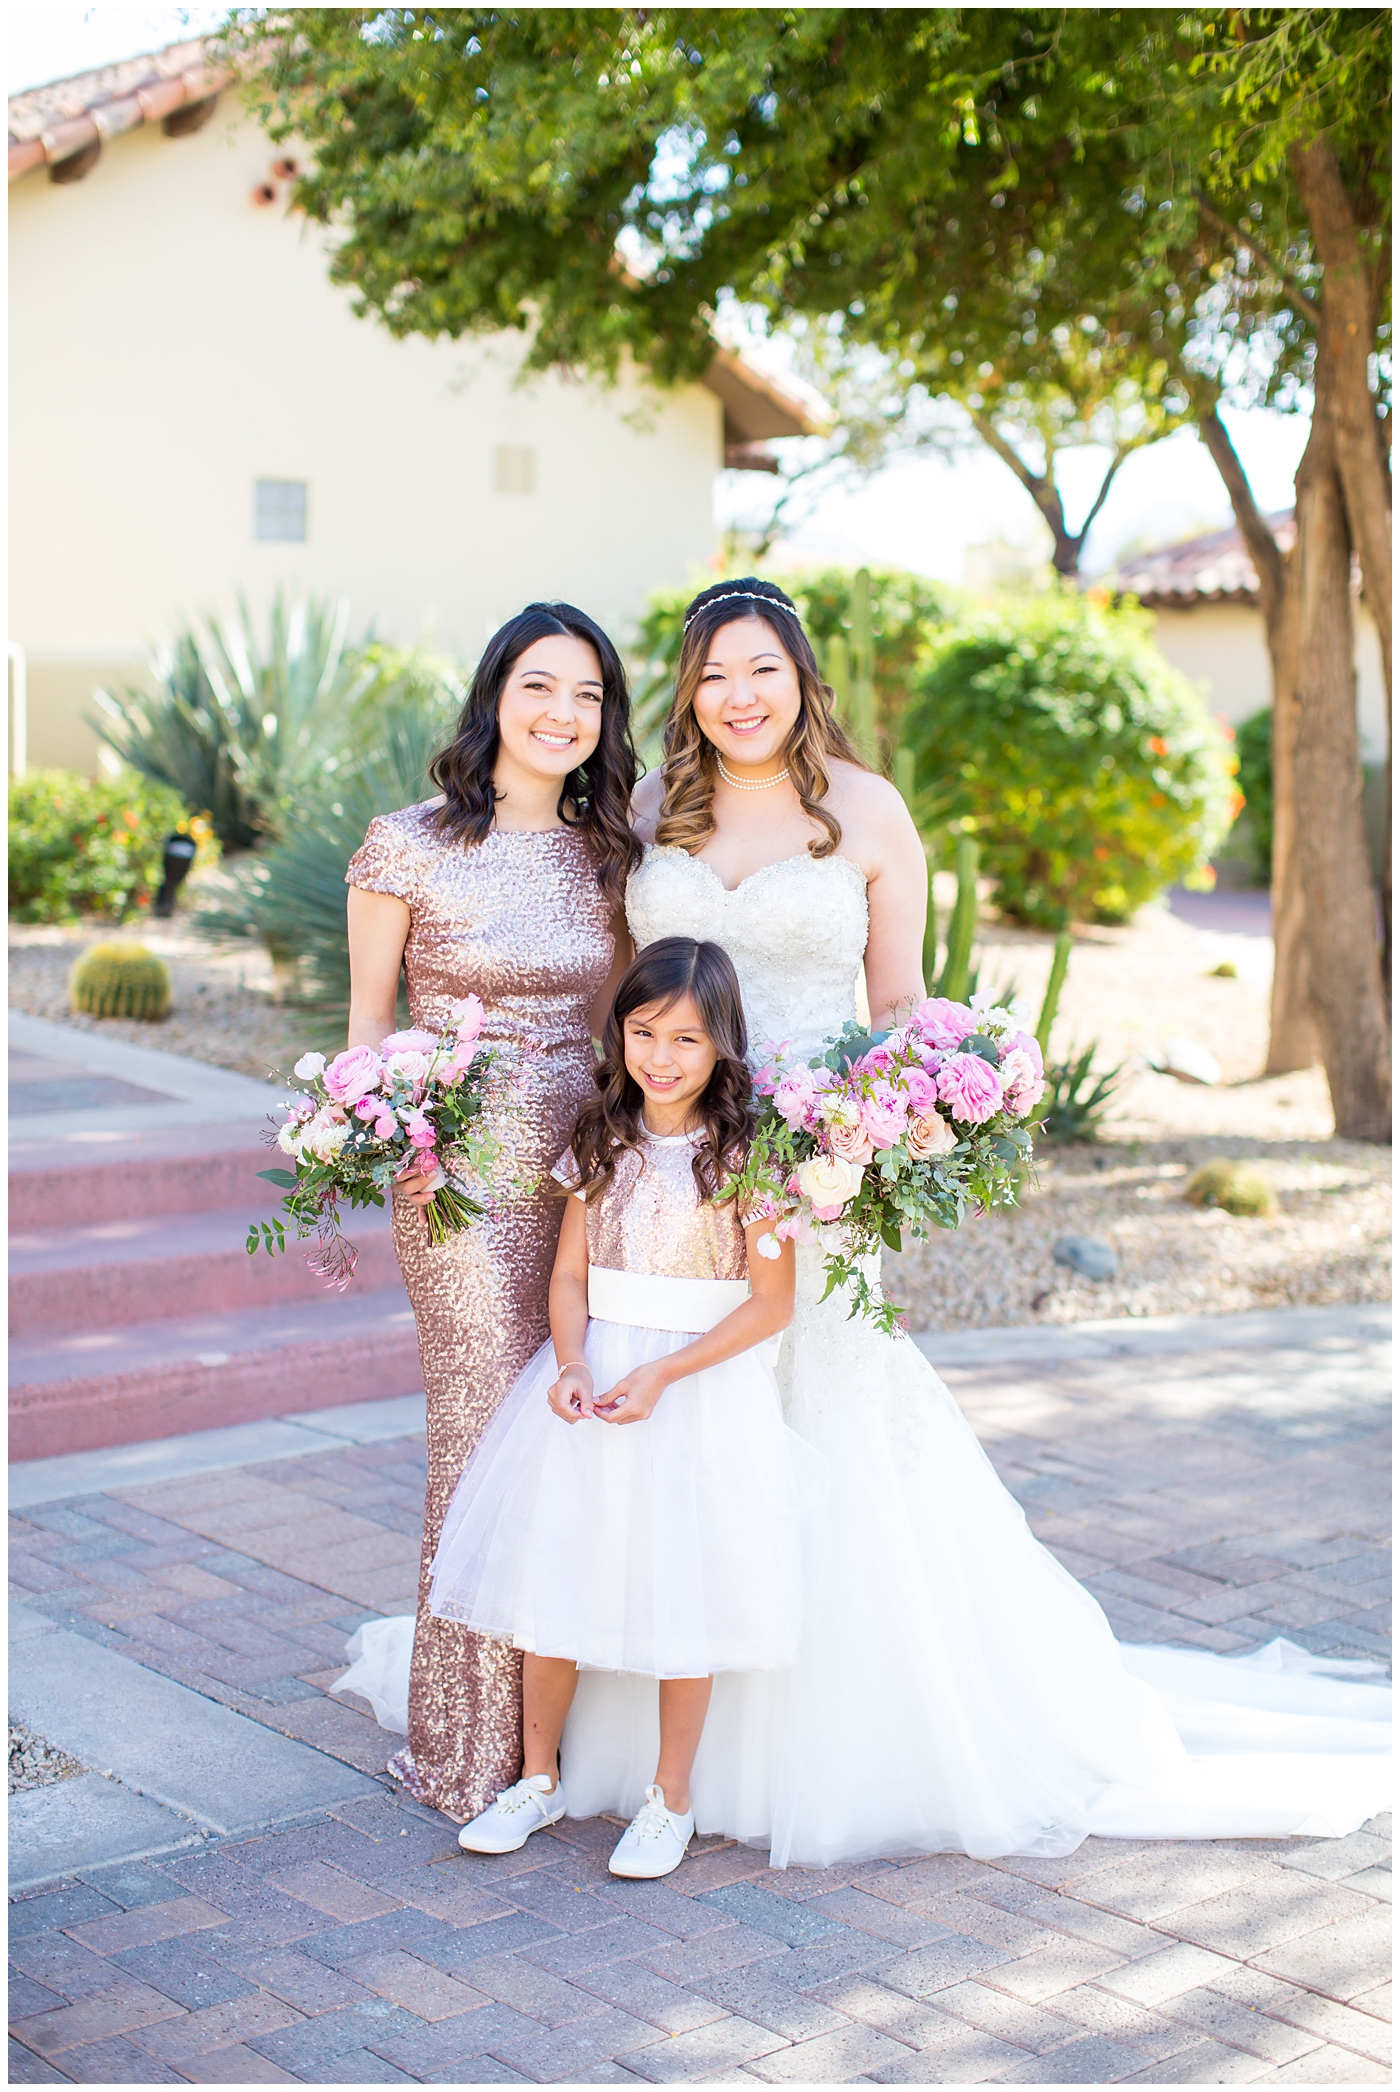 bride in strapless wedding dress with beads and shiny sparkle tool holding pink peony, roses, light coral rose and loose greenery bridal bouquet with bridesmaid in pink sequin dress and flower girl in sneakers on wedding day portrait